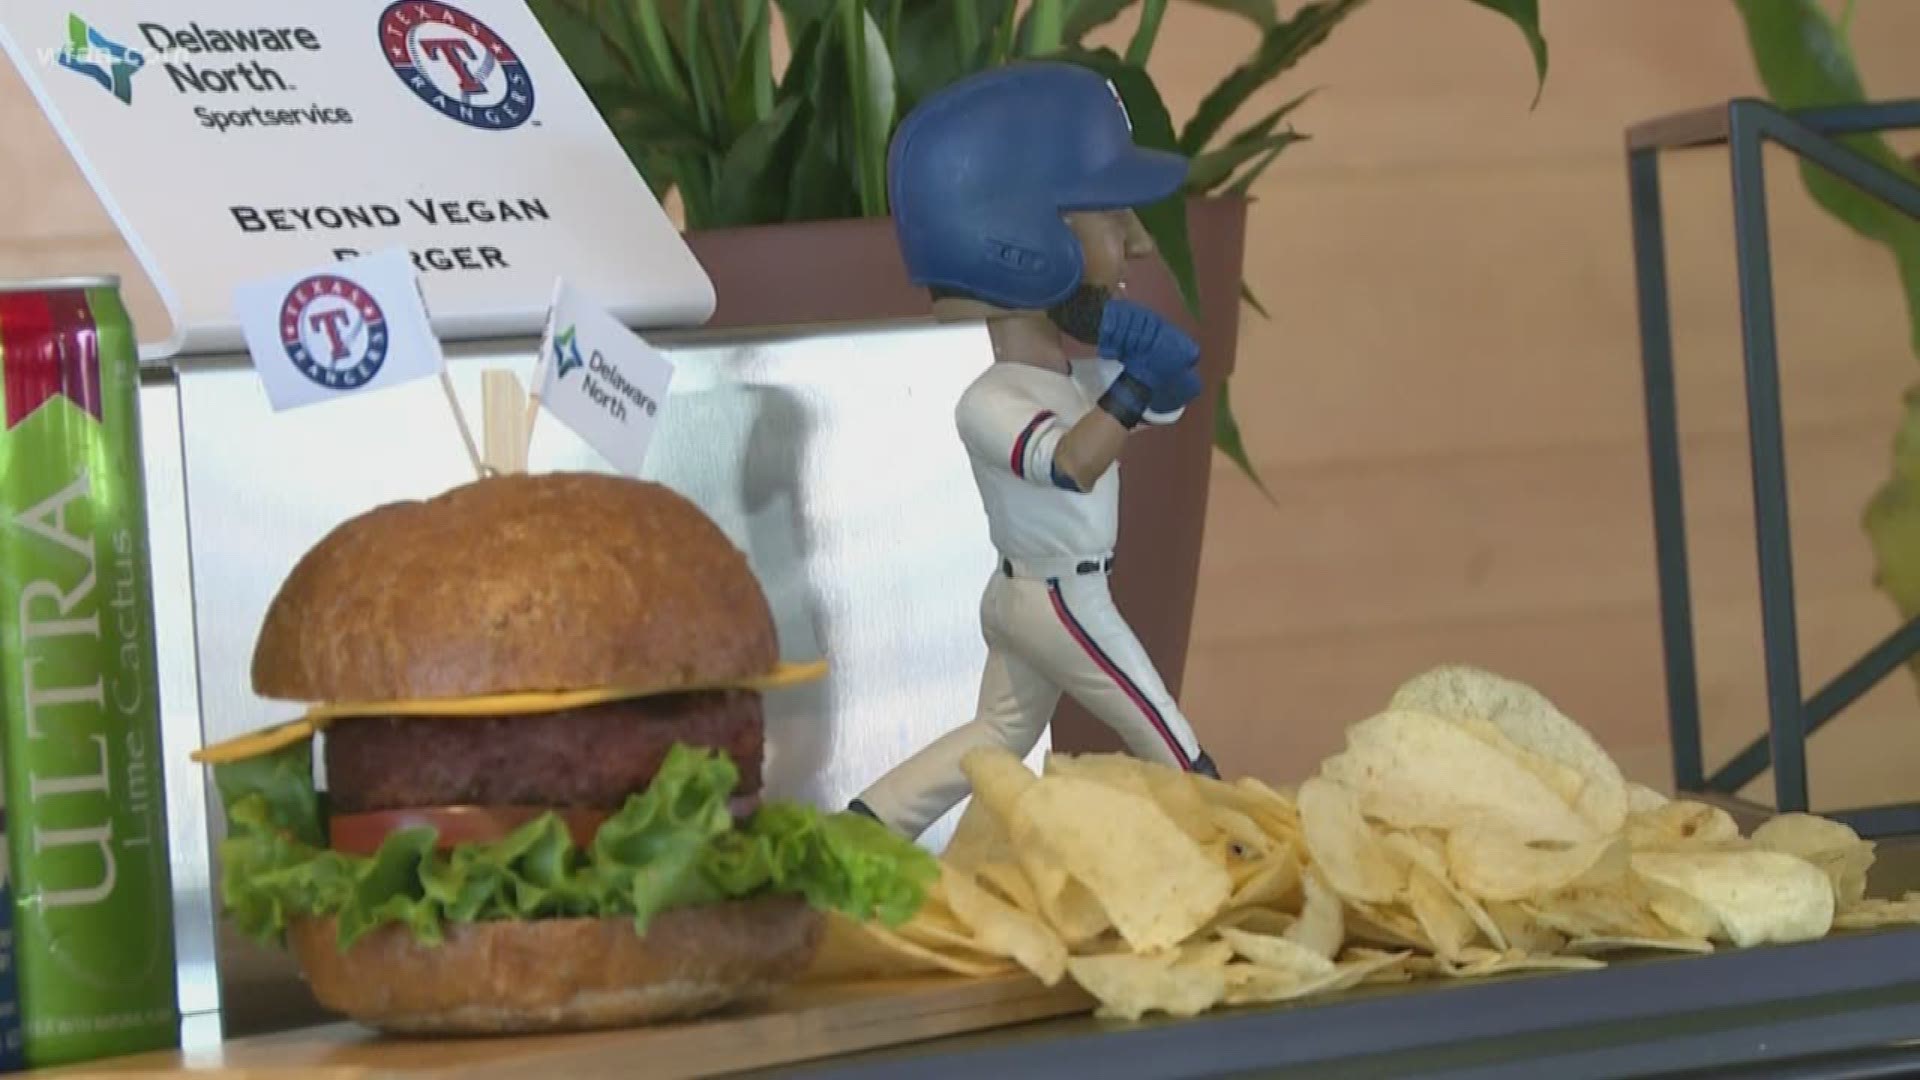 A 24-Inch Burger is Among Six New Food Items for the 2023 Season at Globe  Life Field - D Magazine